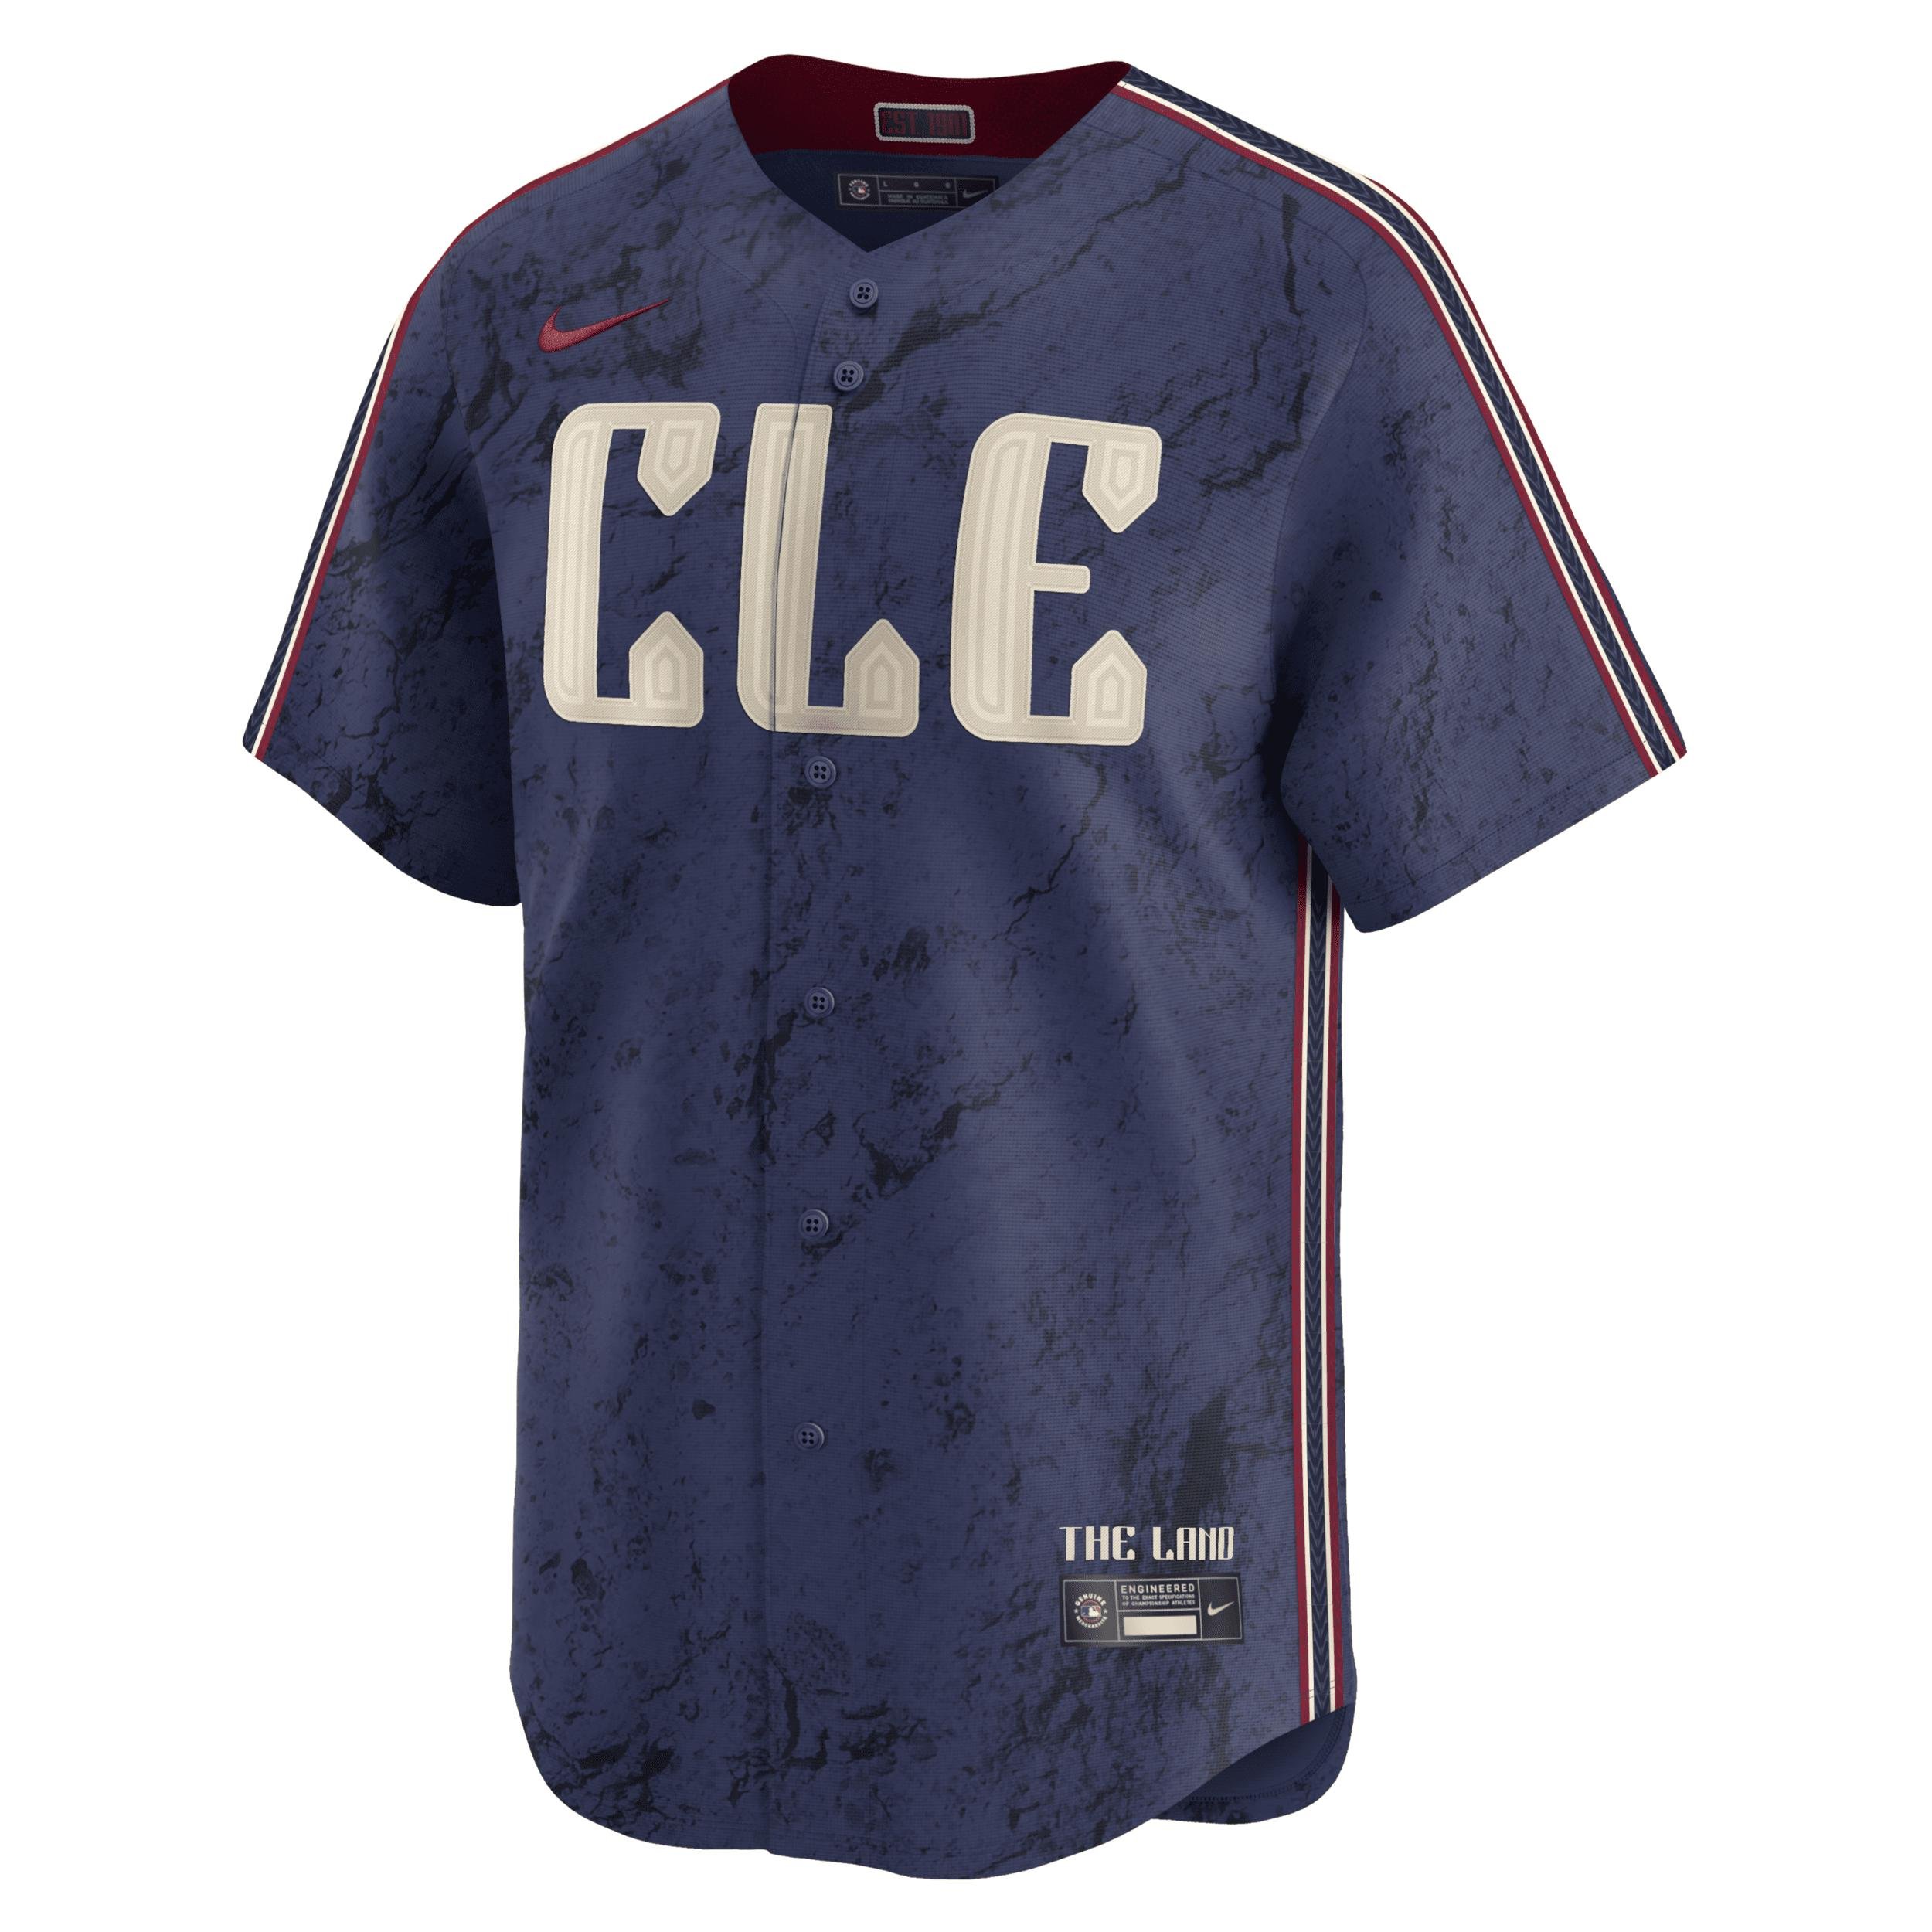 Shane Bieber Cleveland Guardians City Connect Nike Men's Dri-FIT ADV MLB Limited Jersey by NIKE